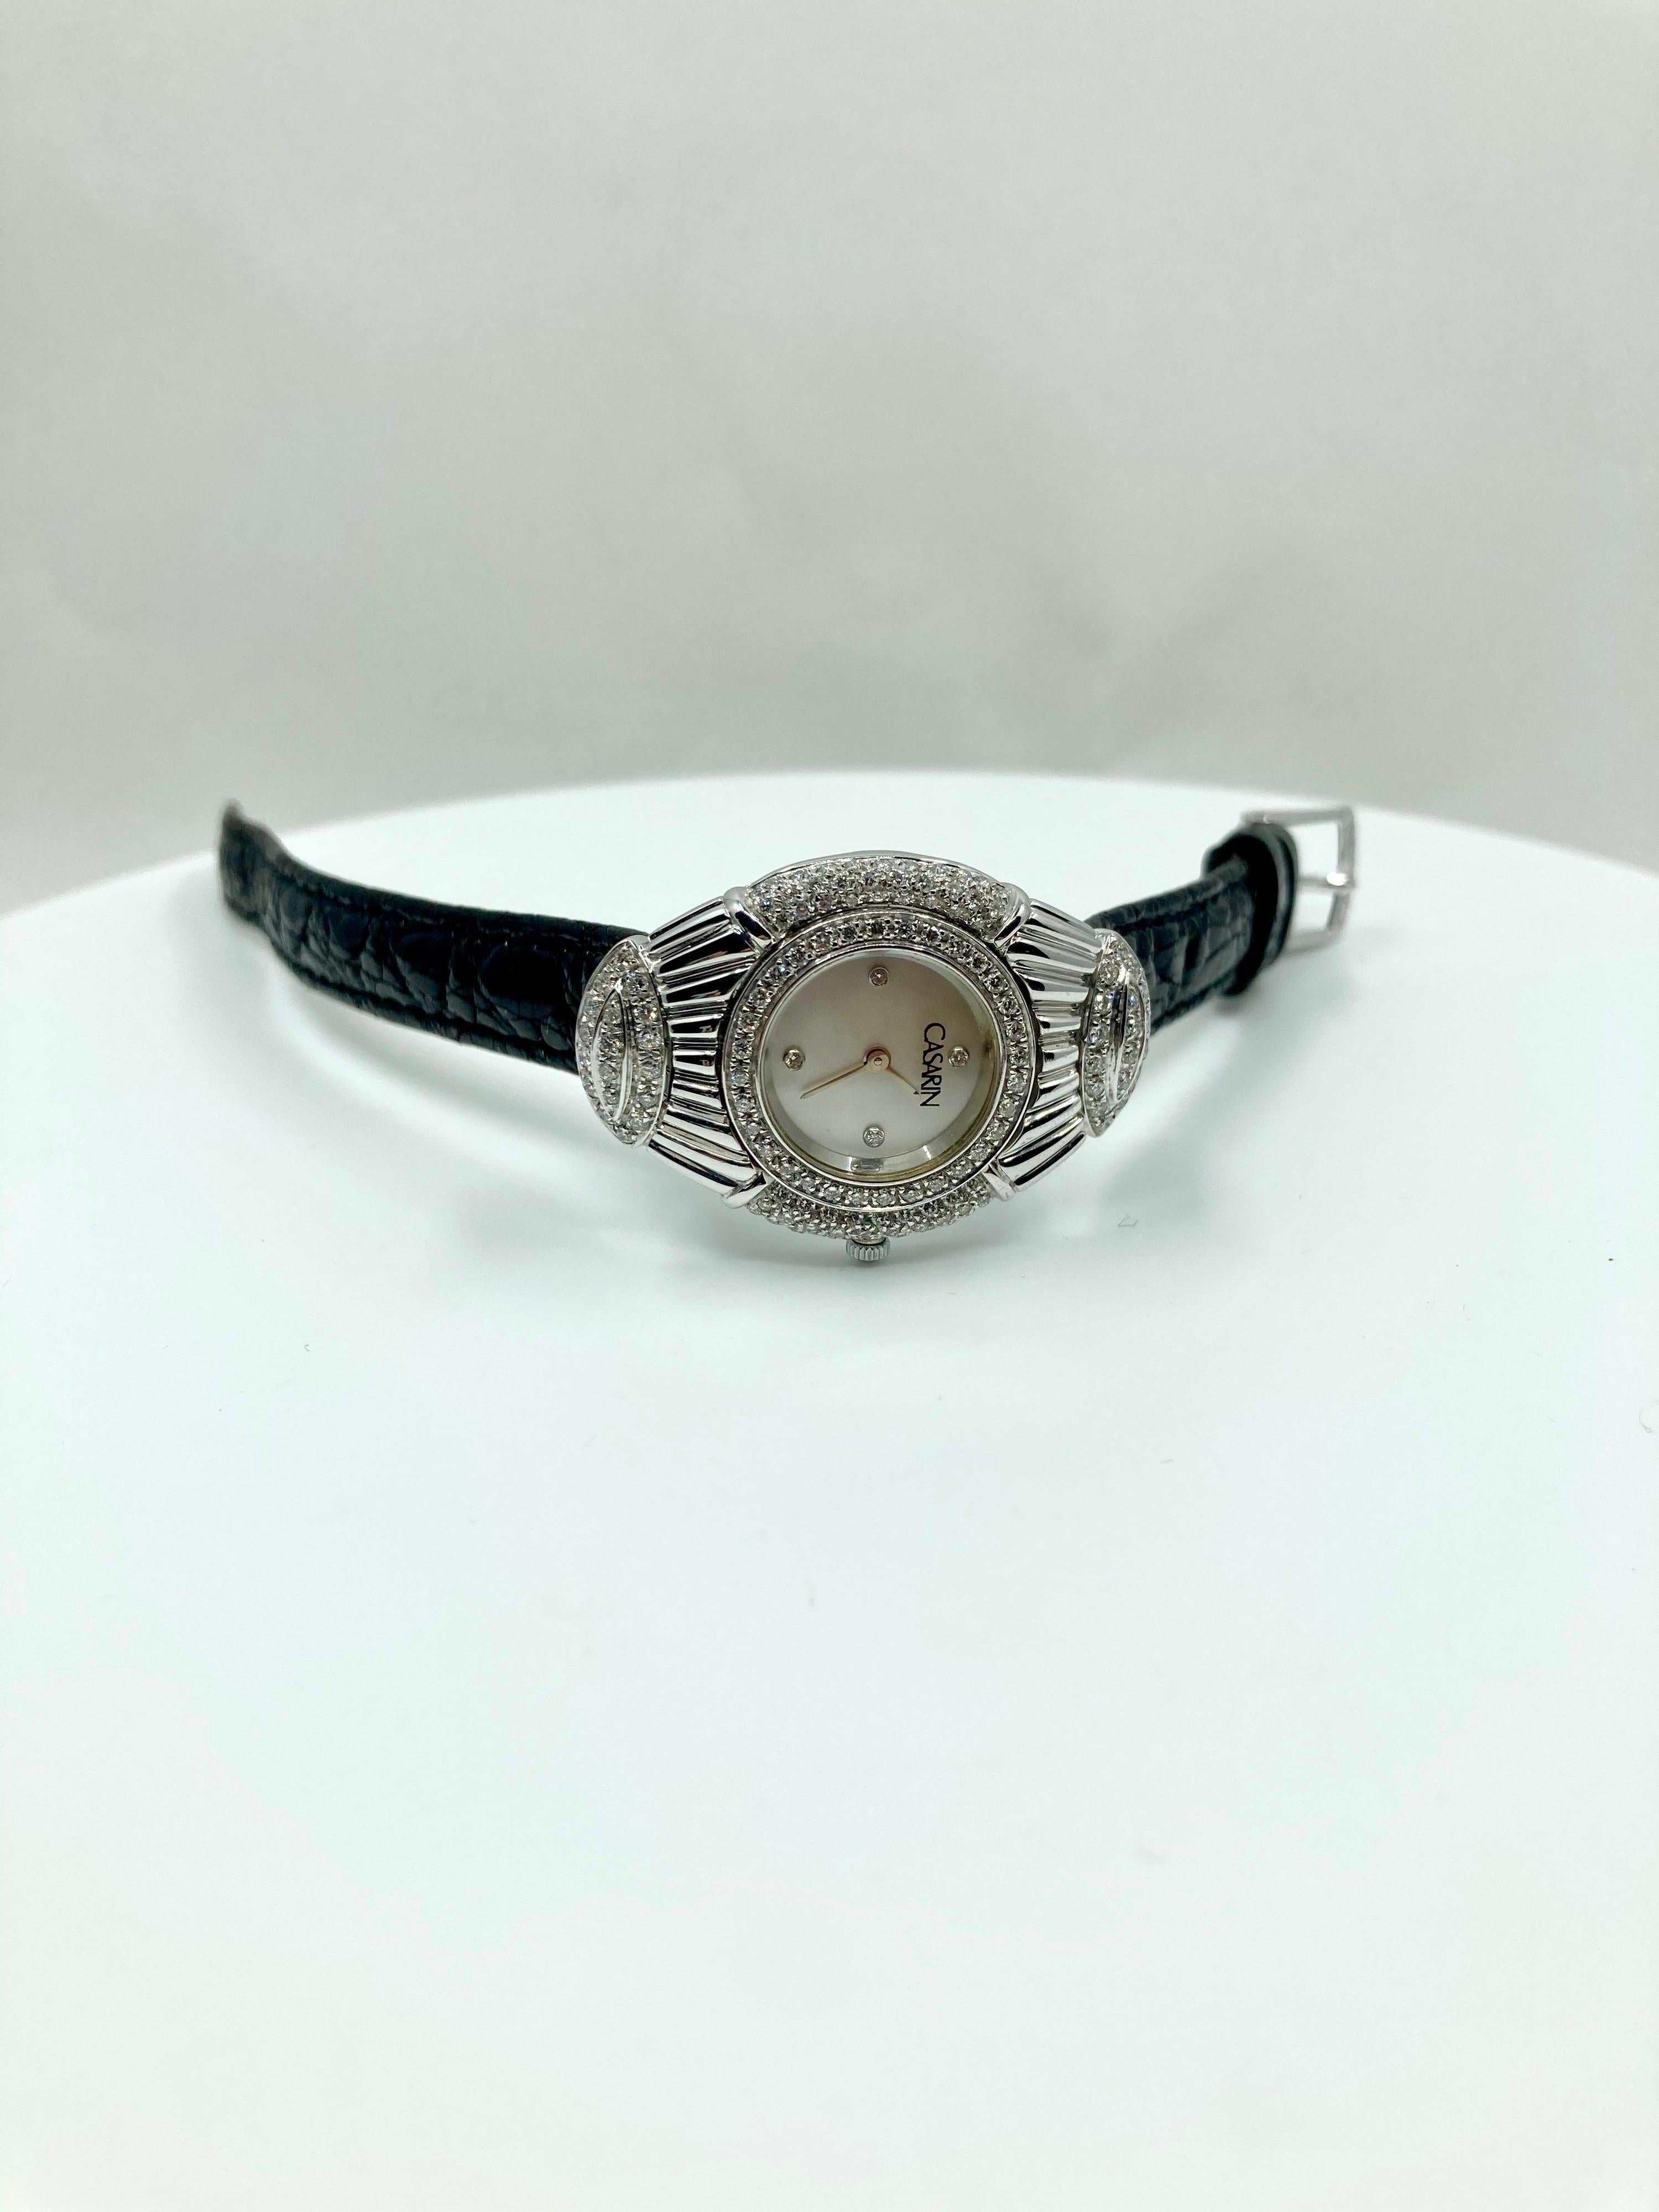 Timeless White Gold watch, Quartz movement, Leather bracelet, with Diamonds ct. 1,18, handmade in Italy by Roberto Casarin.

An elegant combination of a timeless white gold design with diamonds, fine quartz movement, and a lather bracelet for